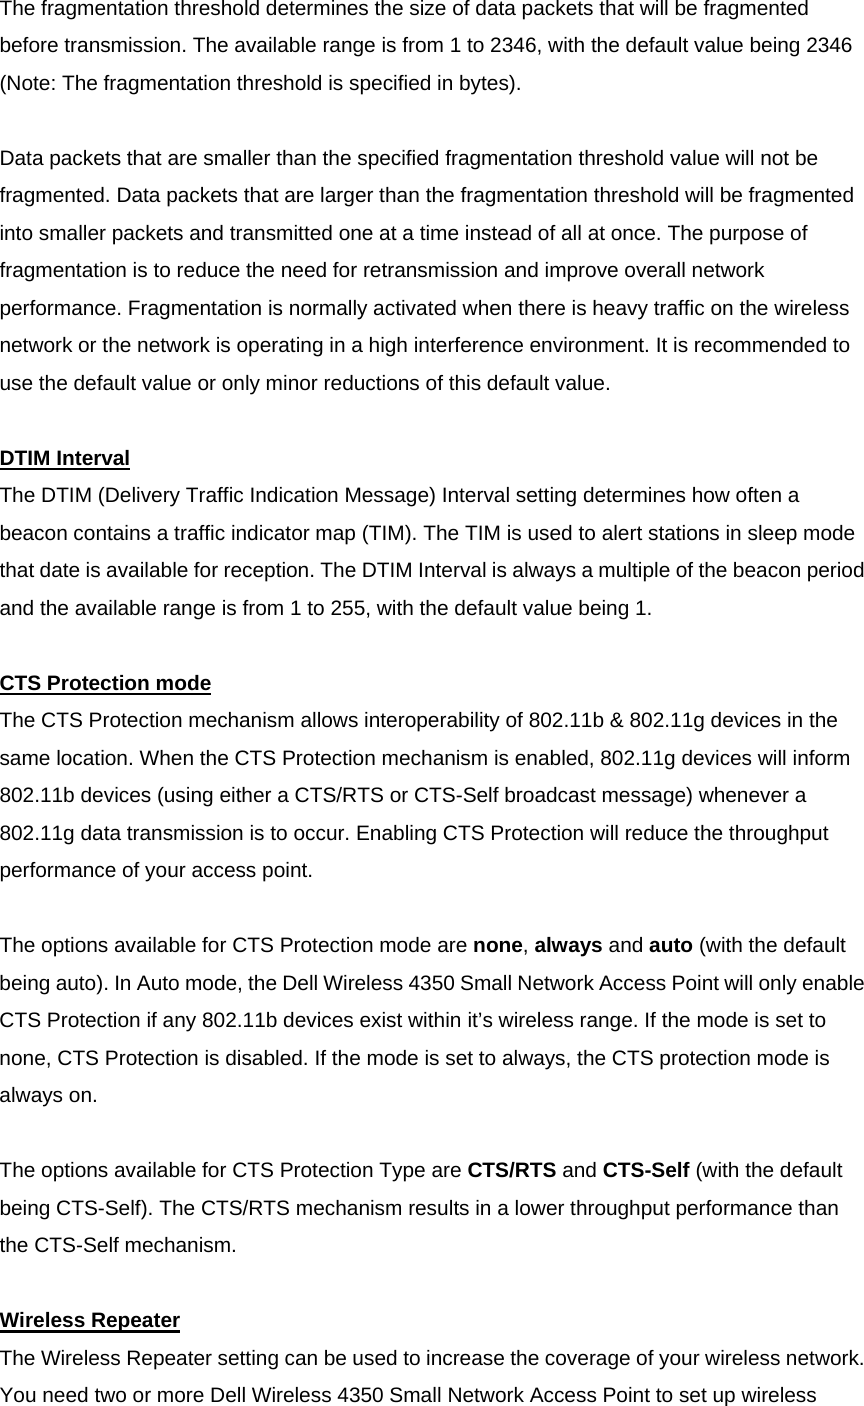 The fragmentation threshold determines the size of data packets that will be fragmented before transmission. The available range is from 1 to 2346, with the default value being 2346 (Note: The fragmentation threshold is specified in bytes).     Data packets that are smaller than the specified fragmentation threshold value will not be fragmented. Data packets that are larger than the fragmentation threshold will be fragmented into smaller packets and transmitted one at a time instead of all at once. The purpose of fragmentation is to reduce the need for retransmission and improve overall network performance. Fragmentation is normally activated when there is heavy traffic on the wireless network or the network is operating in a high interference environment. It is recommended to use the default value or only minor reductions of this default value.     DTIM IntervalThe DTIM (Delivery Traffic Indication Message) Interval setting determines how often a beacon contains a traffic indicator map (TIM). The TIM is used to alert stations in sleep mode that date is available for reception. The DTIM Interval is always a multiple of the beacon period and the available range is from 1 to 255, with the default value being 1.     CTS Protection modeThe CTS Protection mechanism allows interoperability of 802.11b &amp; 802.11g devices in the same location. When the CTS Protection mechanism is enabled, 802.11g devices will inform 802.11b devices (using either a CTS/RTS or CTS-Self broadcast message) whenever a 802.11g data transmission is to occur. Enabling CTS Protection will reduce the throughput performance of your access point.     The options available for CTS Protection mode are none, always and auto (with the default being auto). In Auto mode, the Dell Wireless 4350 Small Network Access Point will only enable CTS Protection if any 802.11b devices exist within it’s wireless range. If the mode is set to none, CTS Protection is disabled. If the mode is set to always, the CTS protection mode is always on.     The options available for CTS Protection Type are CTS/RTS and CTS-Self (with the default being CTS-Self). The CTS/RTS mechanism results in a lower throughput performance than the CTS-Self mechanism.     Wireless RepeaterThe Wireless Repeater setting can be used to increase the coverage of your wireless network. You need two or more Dell Wireless 4350 Small Network Access Point to set up wireless 